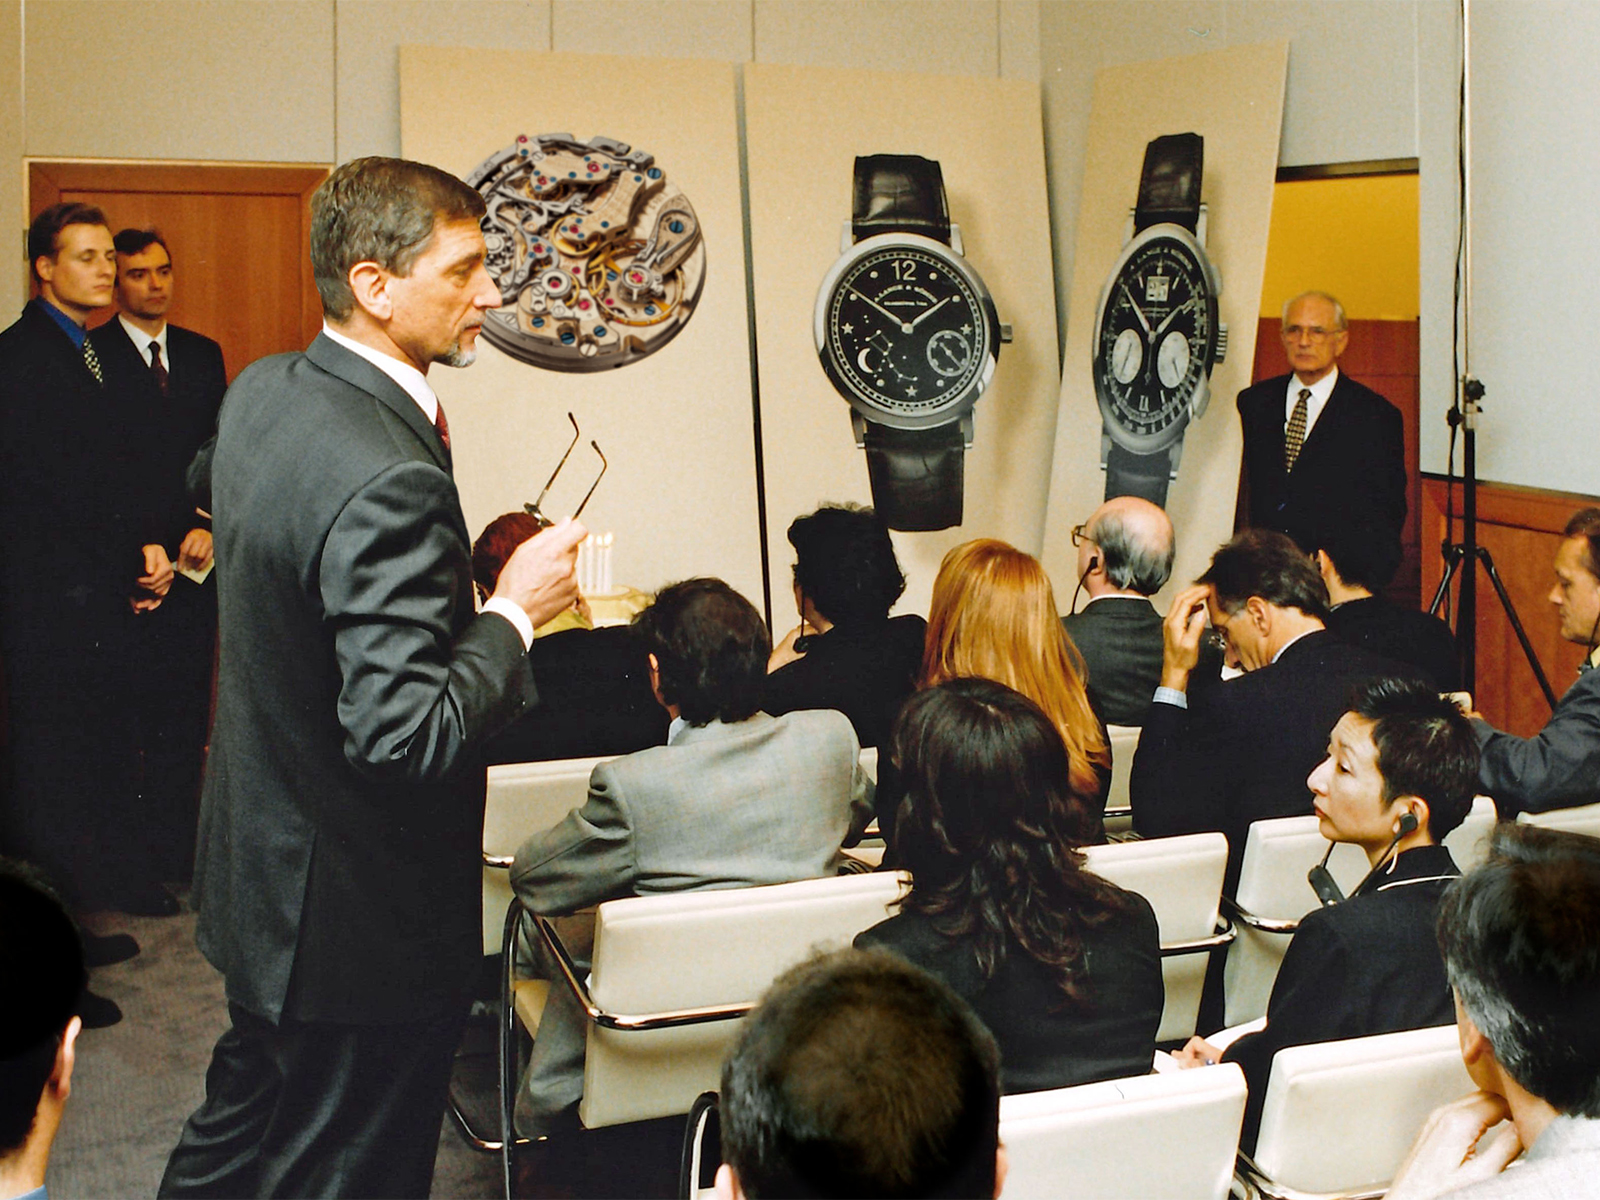 Günter Blümlein and Walter Lange present the DATOGRAPH at Baselworld 1999